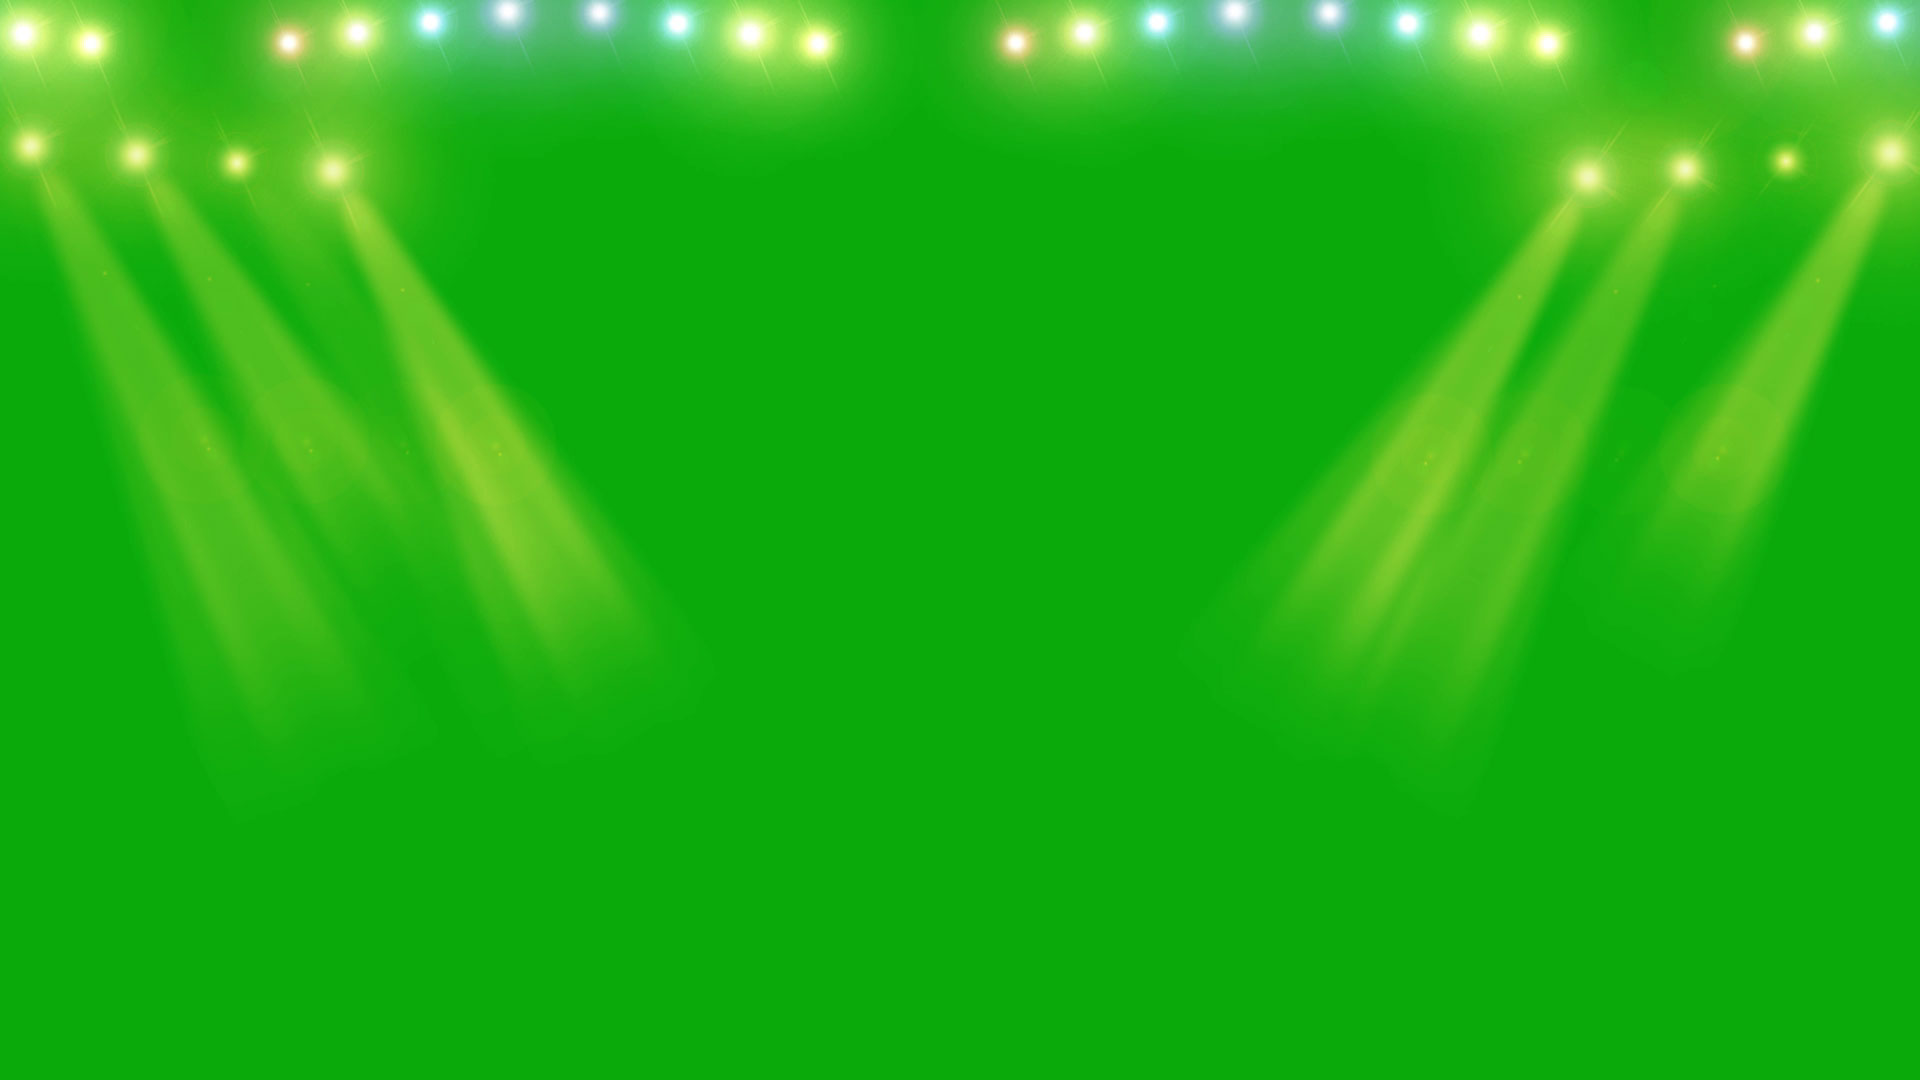 Green Screen Concert Stage Lights Animated Background No Copyright Footage  | All Design Creative